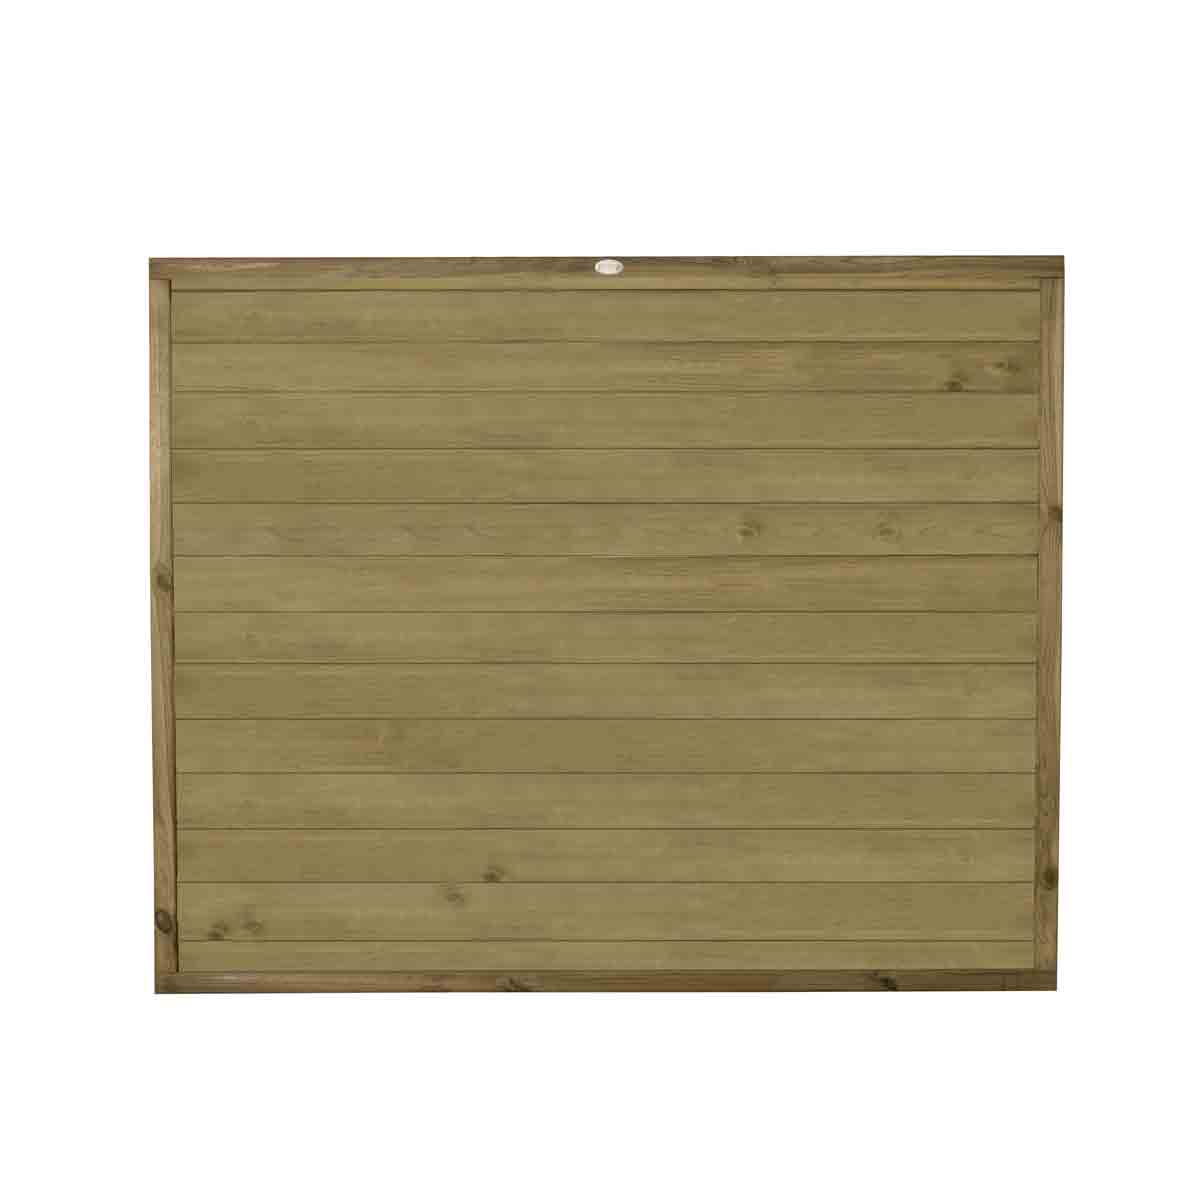 Forest Garden 4'11'' x 6' (152 x 183cm) Pressure Treated Horizontal Fence Panel